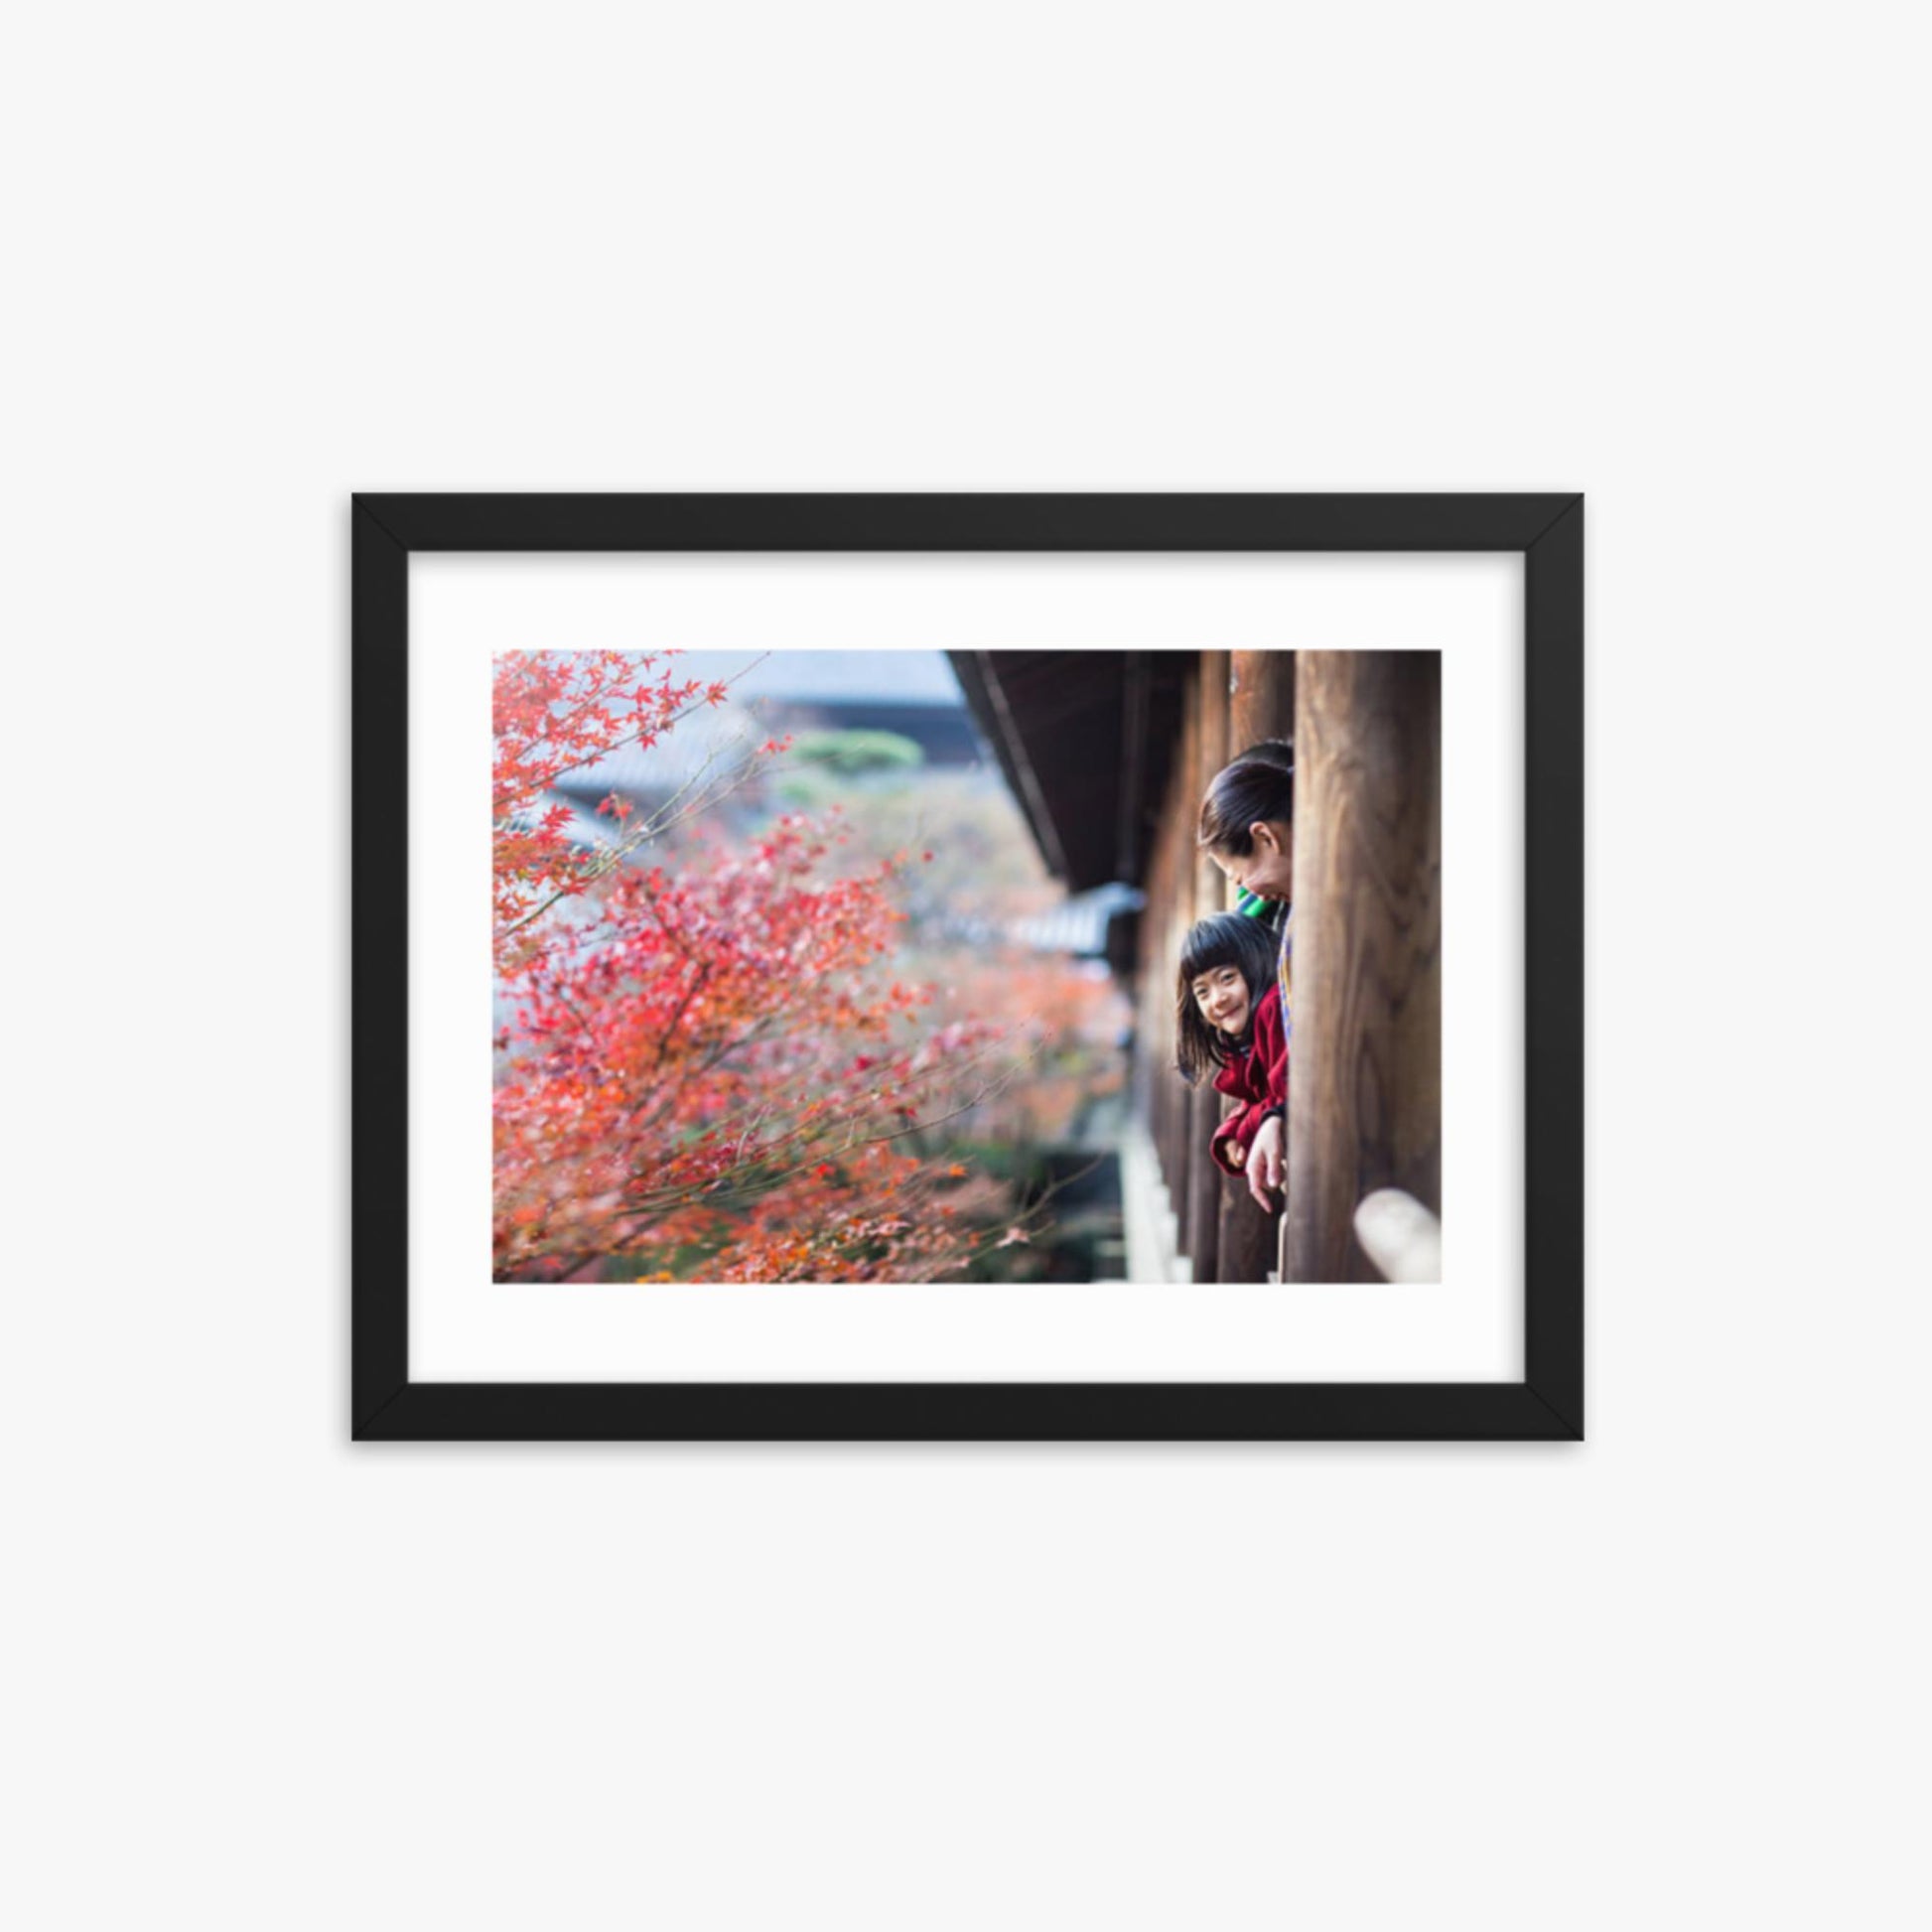 Father, mother and daughter at a temple enjoying autumn leaves 12x16 in Poster With Black Frame